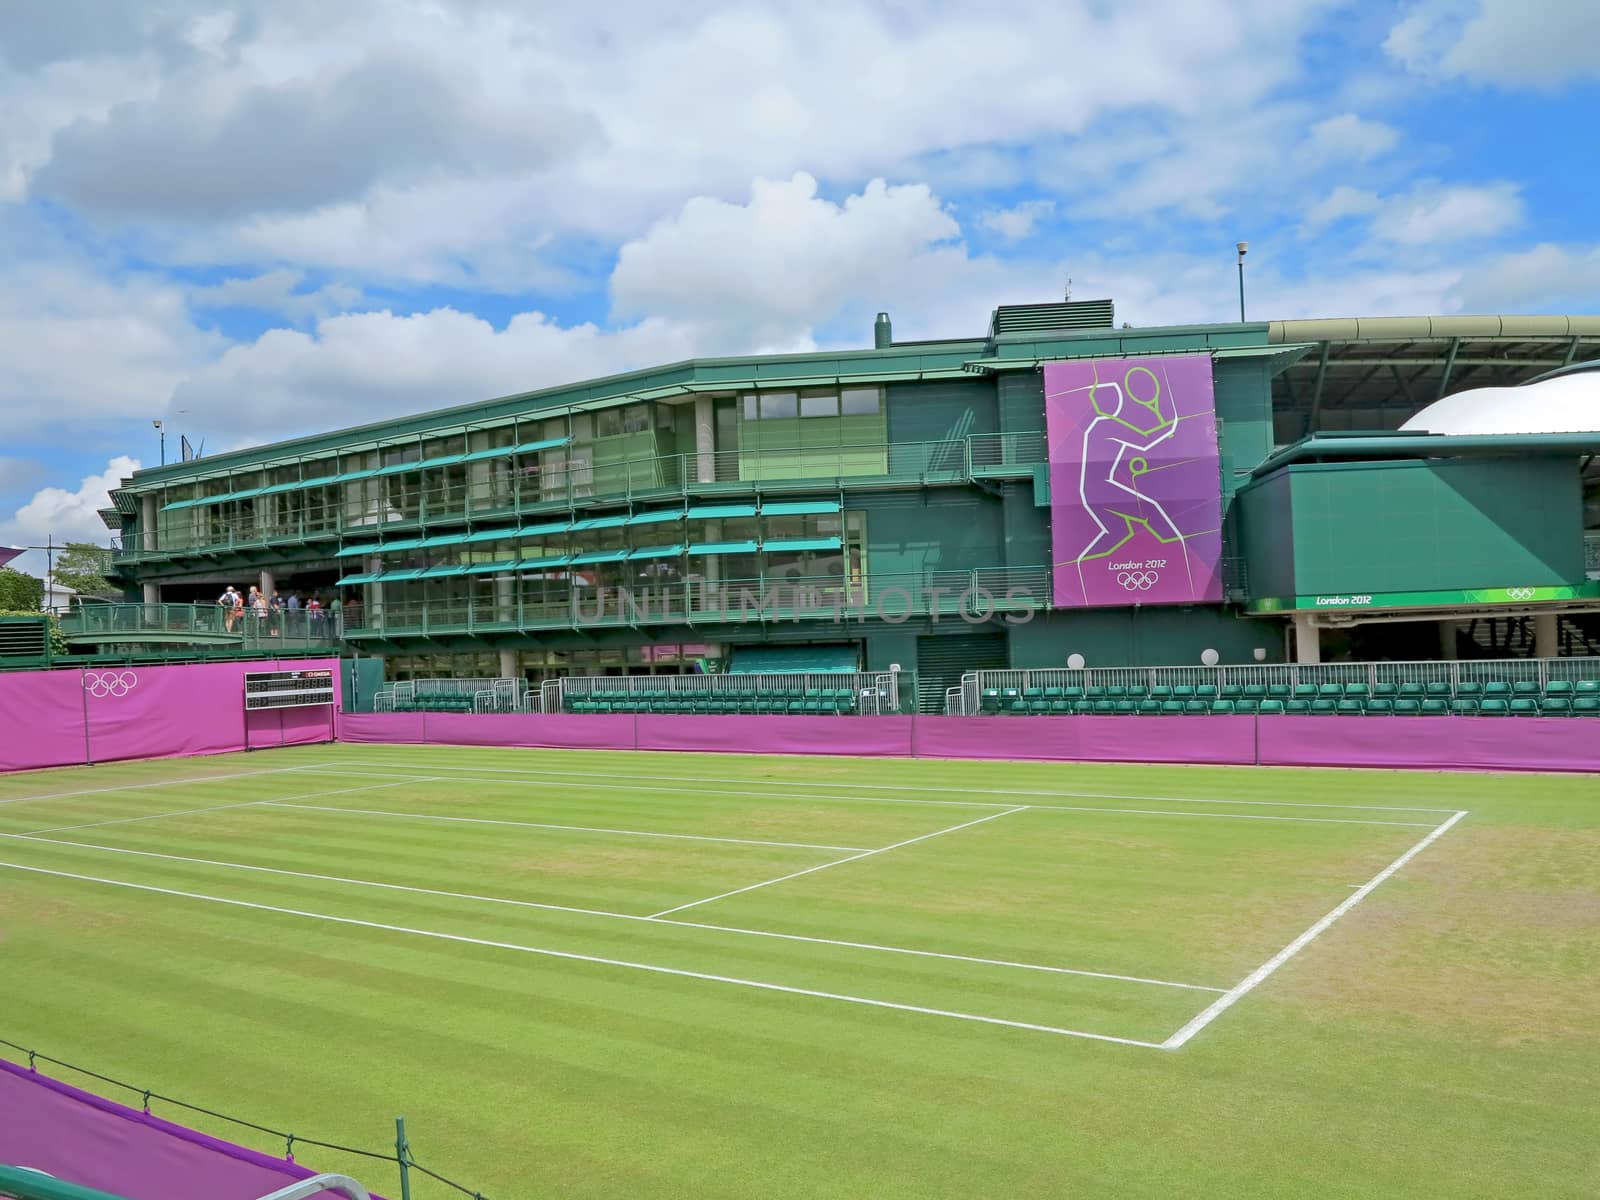 WIMBLEDON, ENGLAND - August 2nd, 2012 � One of the tennis courts at Wimbledon during the summer Olympics in London in 2012.